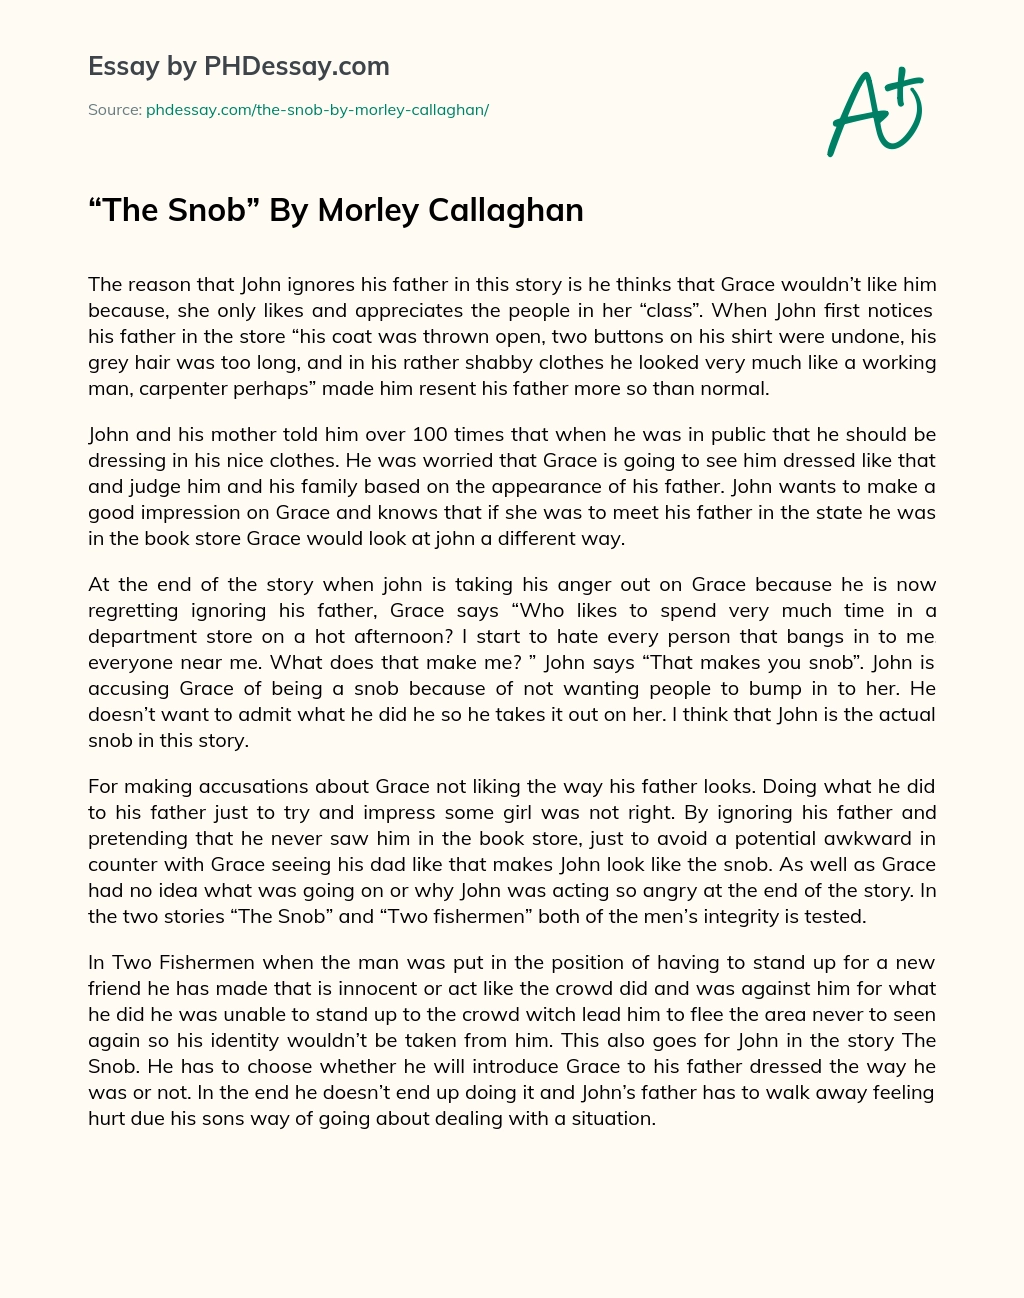 The Snob By Morley Callaghan essay